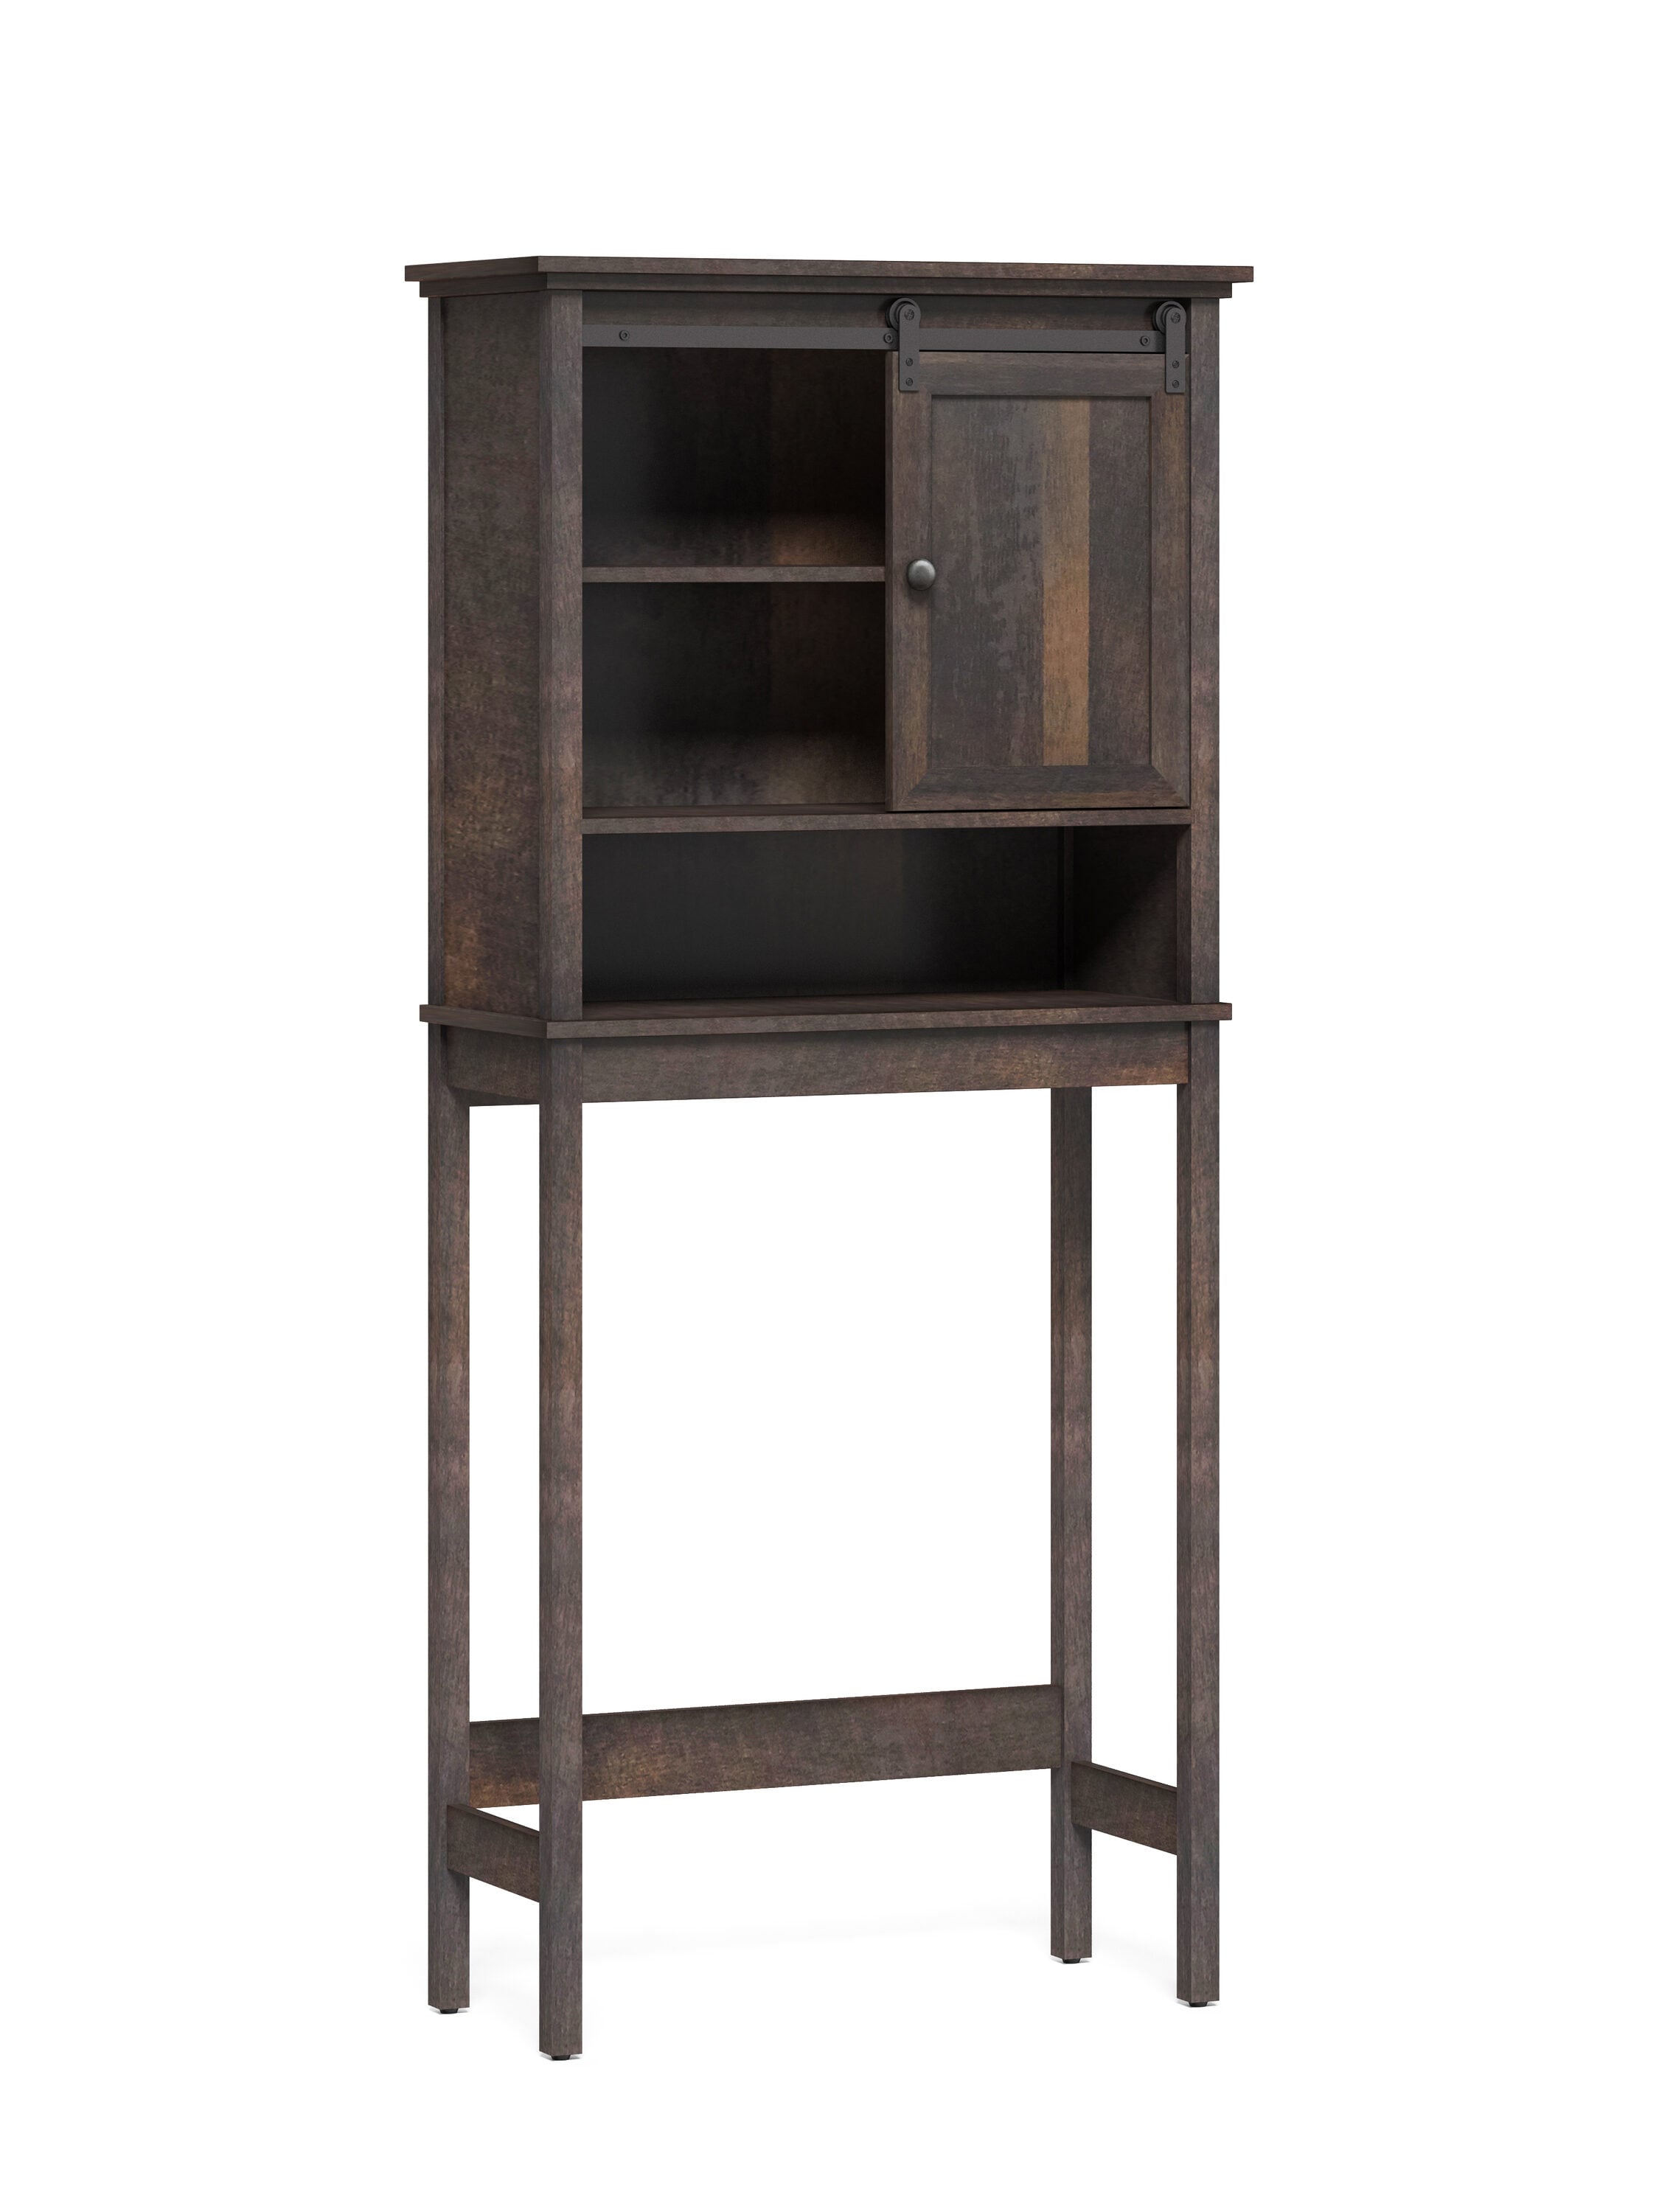 Farmhouse Over The Toilet Storage Cabinet 4-Tier Bathroom Shelves Over  Toilet with Storage Bag and Hooks, Rustic Brown